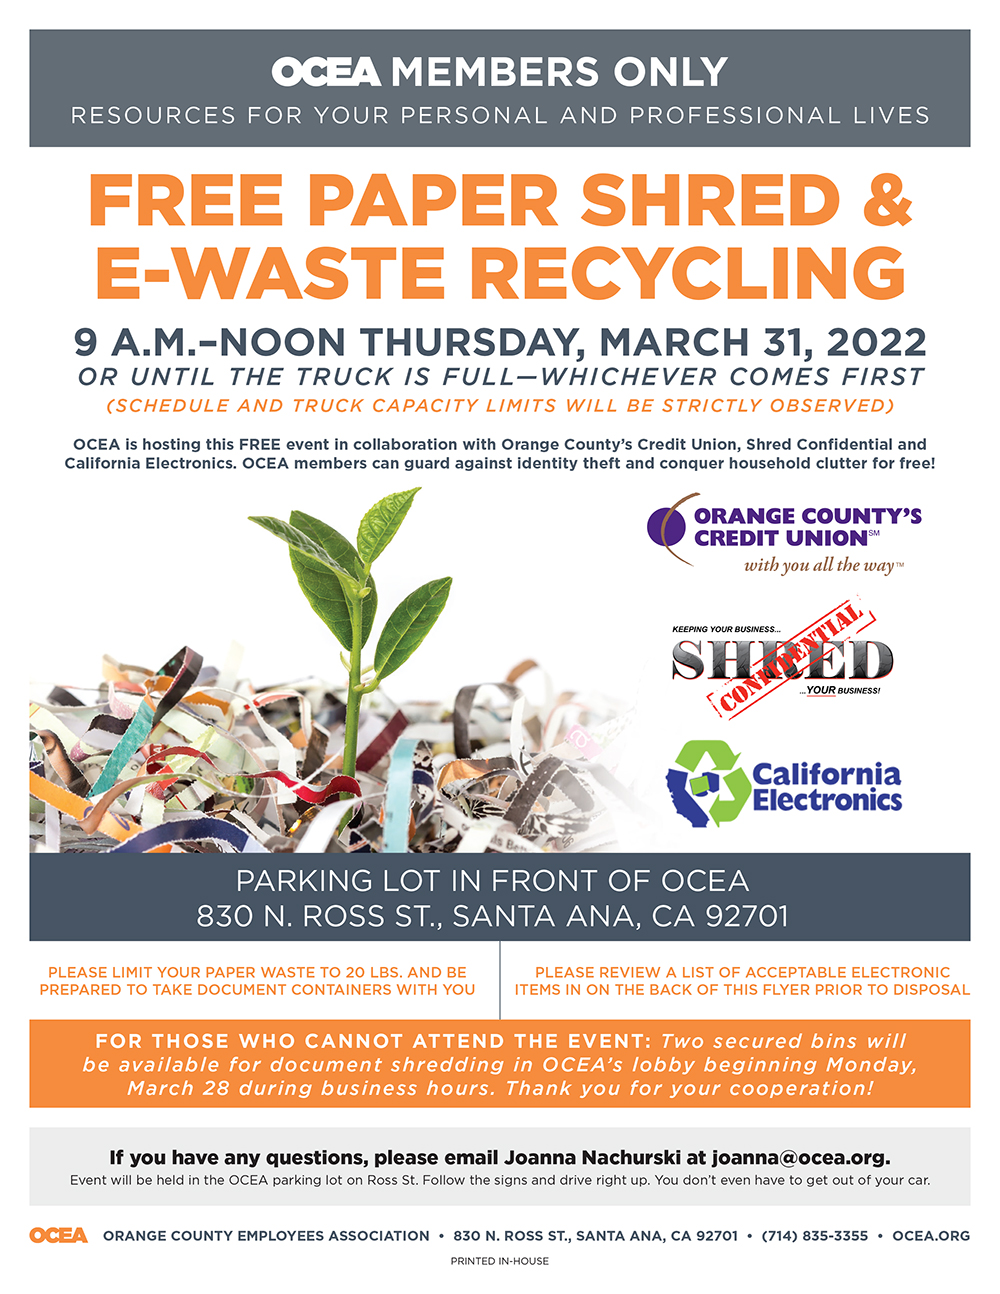 FREE PAPER SHRED EVENT Thursday, March 31! Orange County Employees